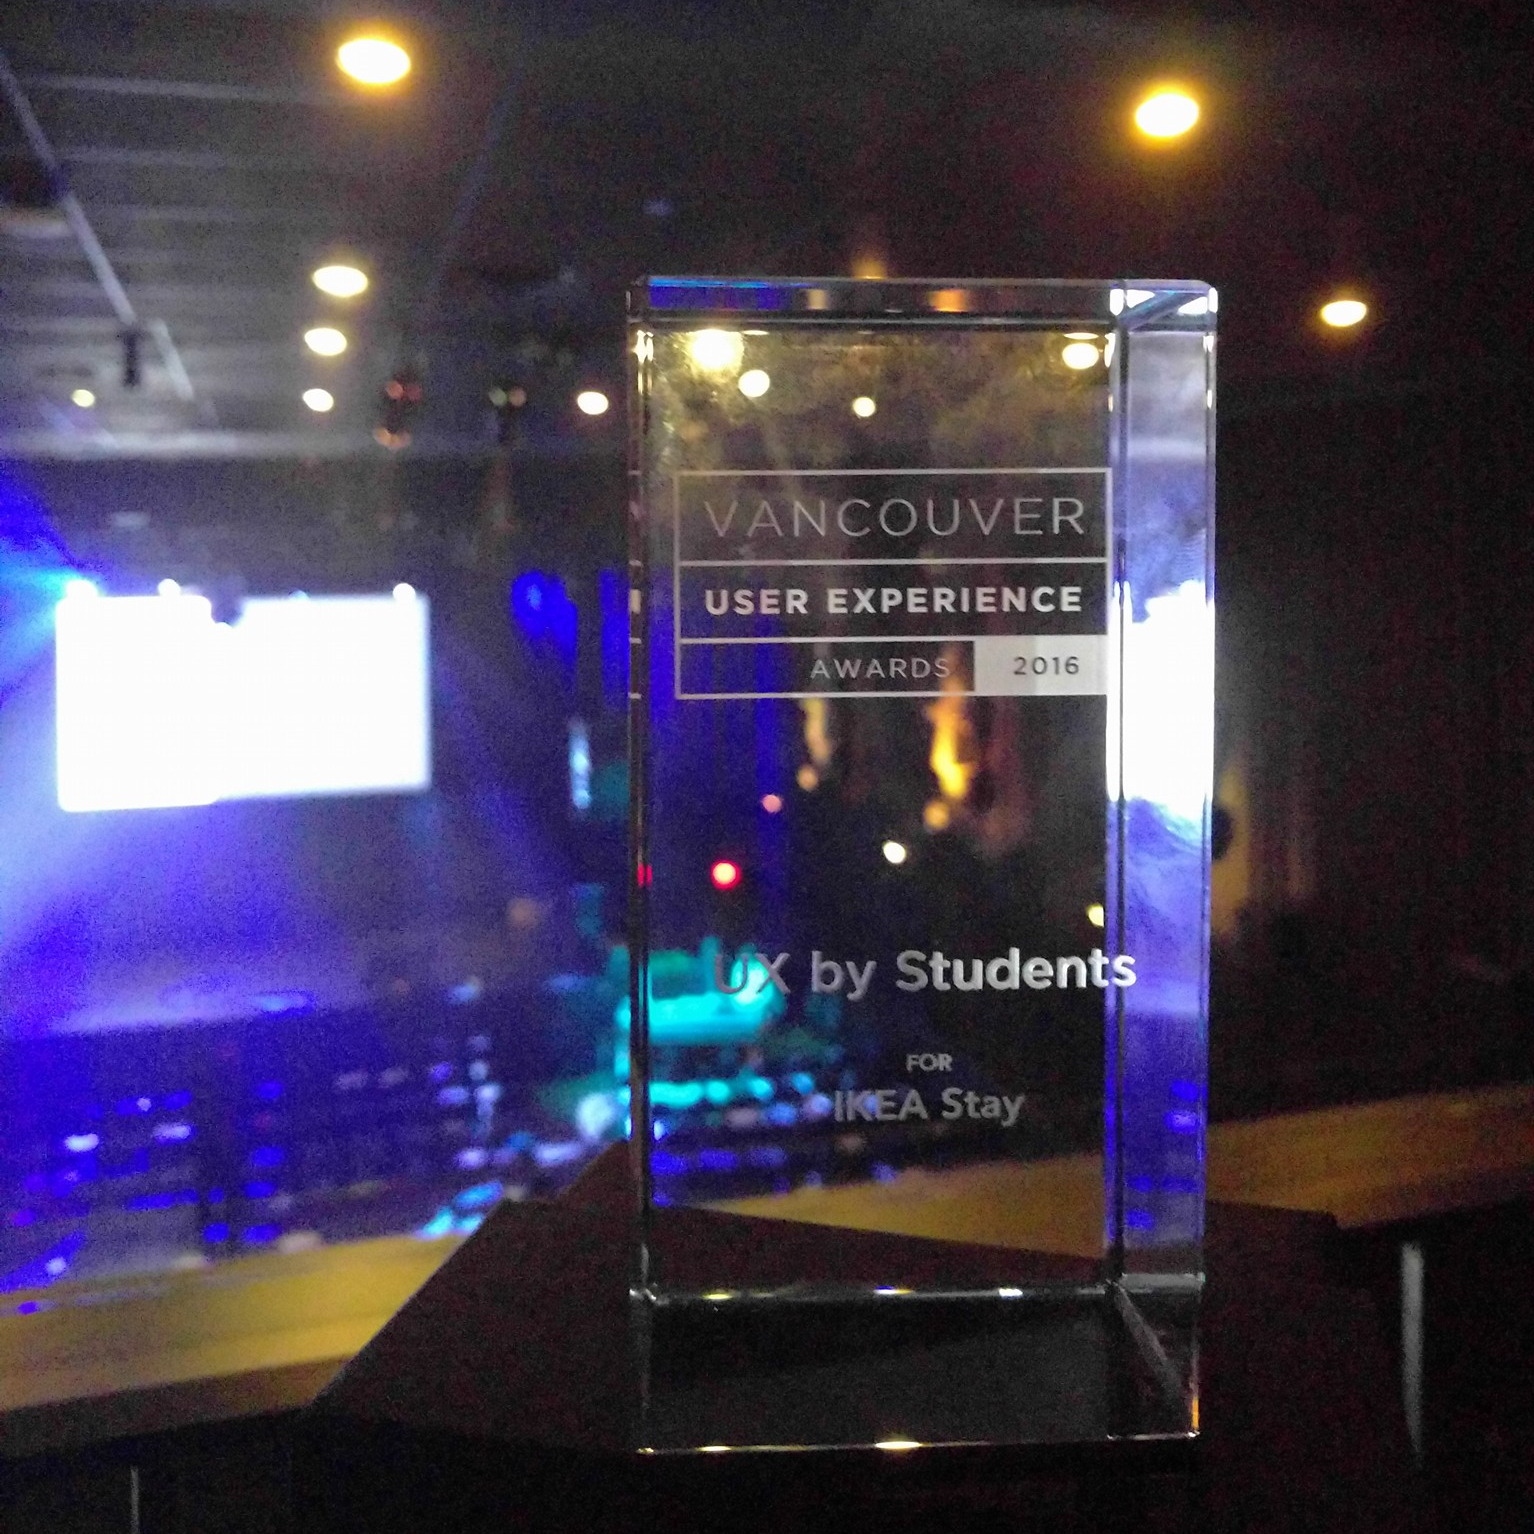 UX by Students award - Vancouver UX Awards 2016. Picture credit: Edward Chen